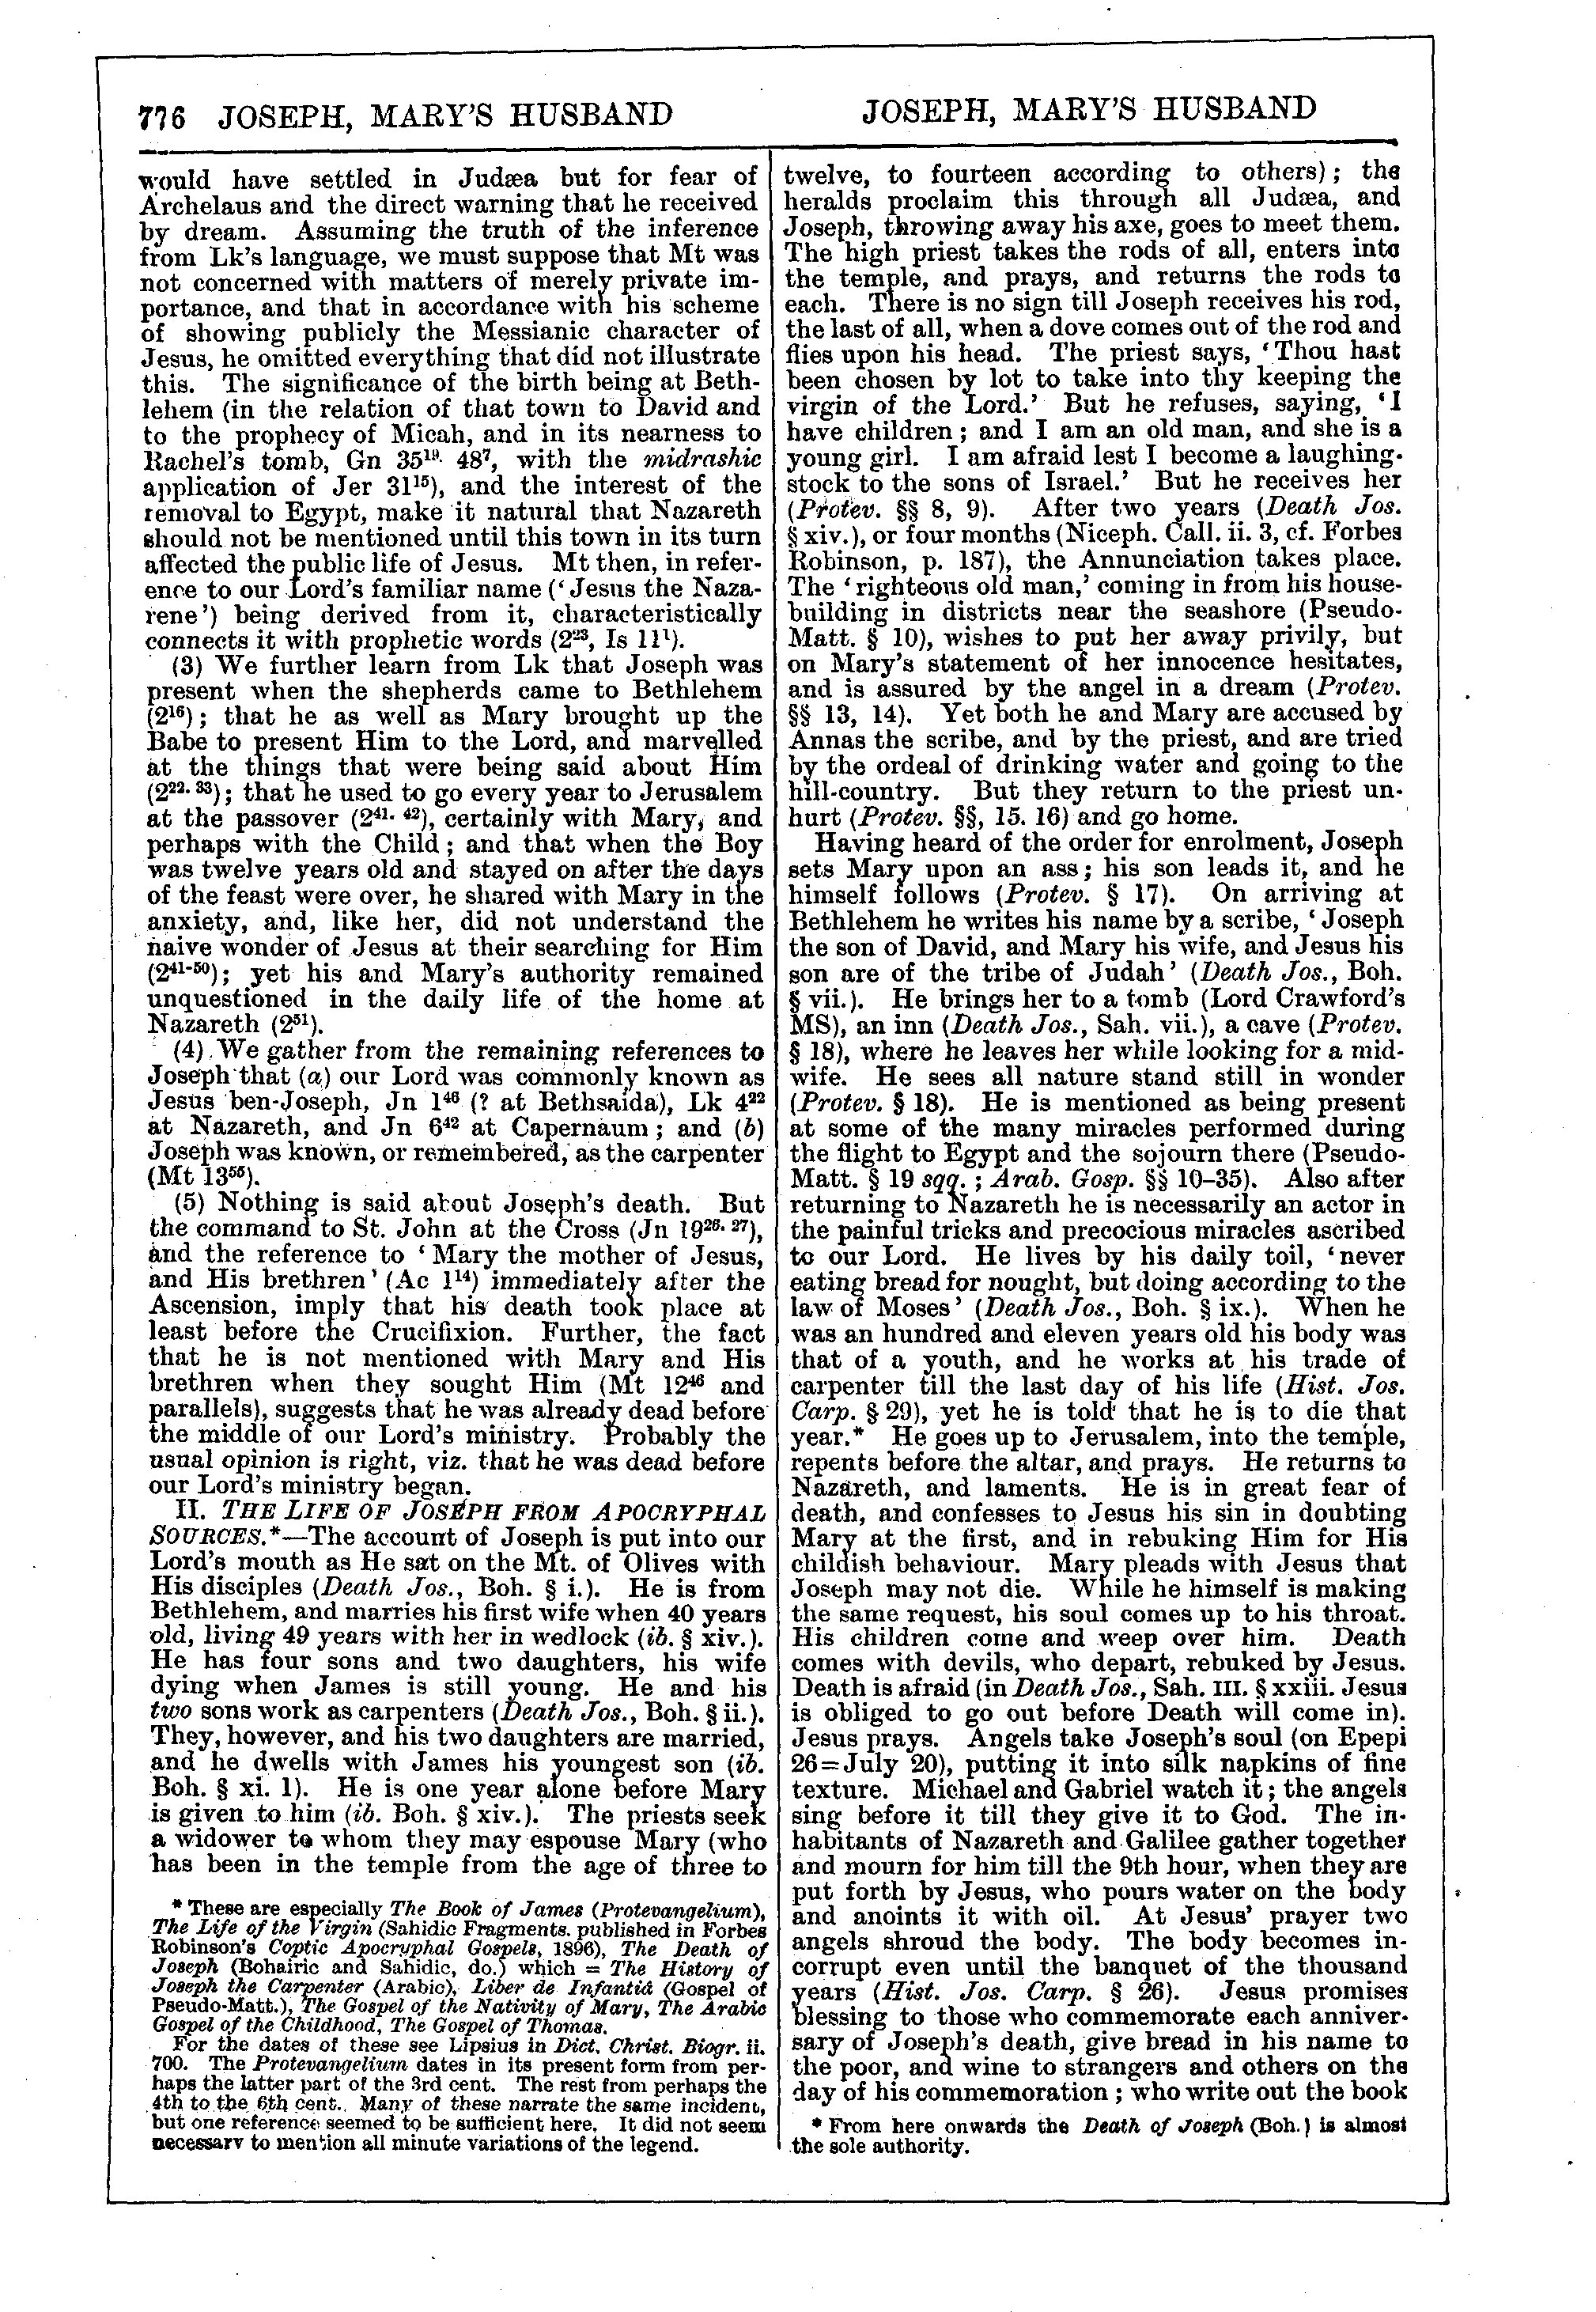 Image of page 776